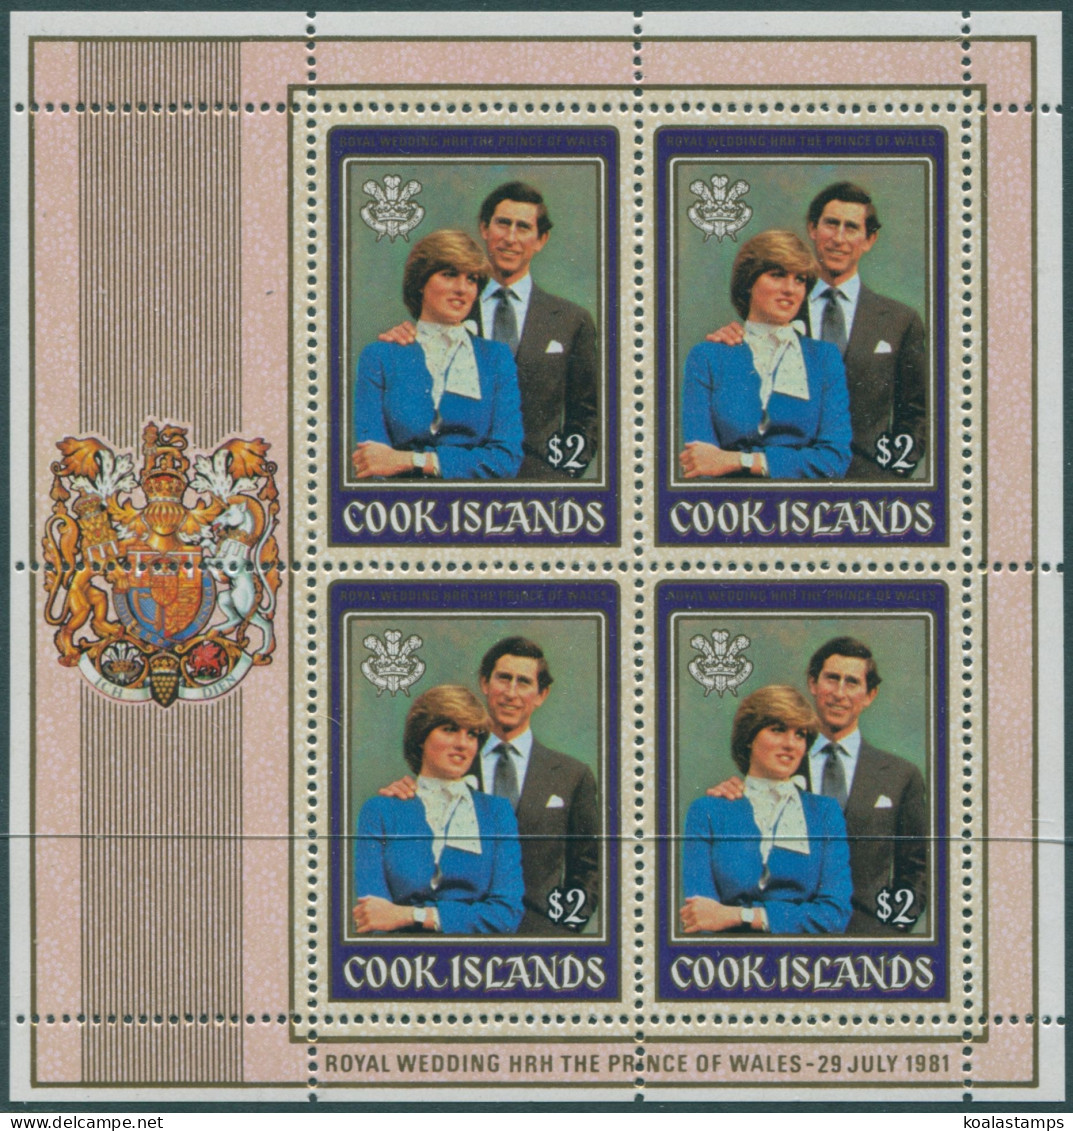 Cook Islands 1981 SG813 $2 Charles And Diana MS MNH - Cook Islands